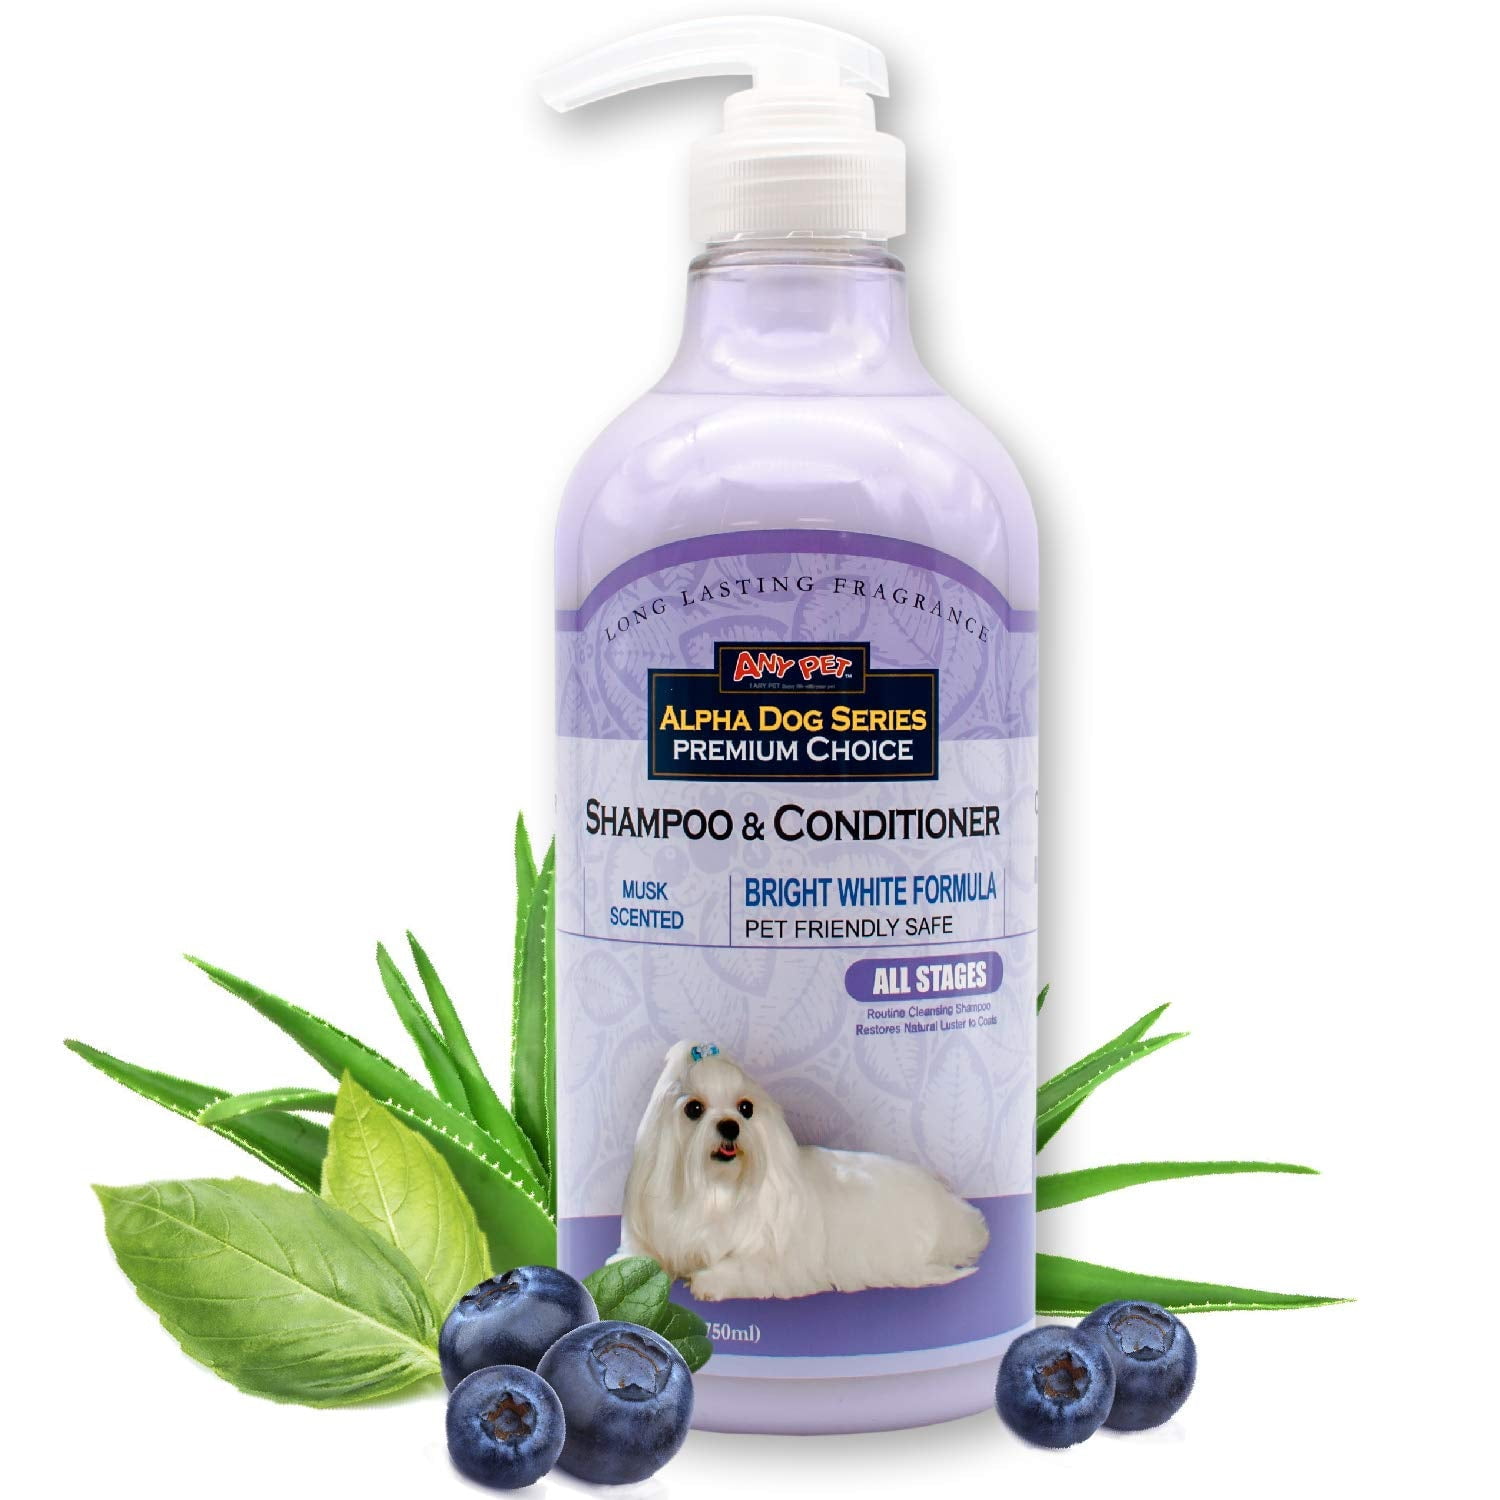 Palmer's for Pets Moisturizing Paw Dog Balm Pet Lotion Cocoa Butter Formula